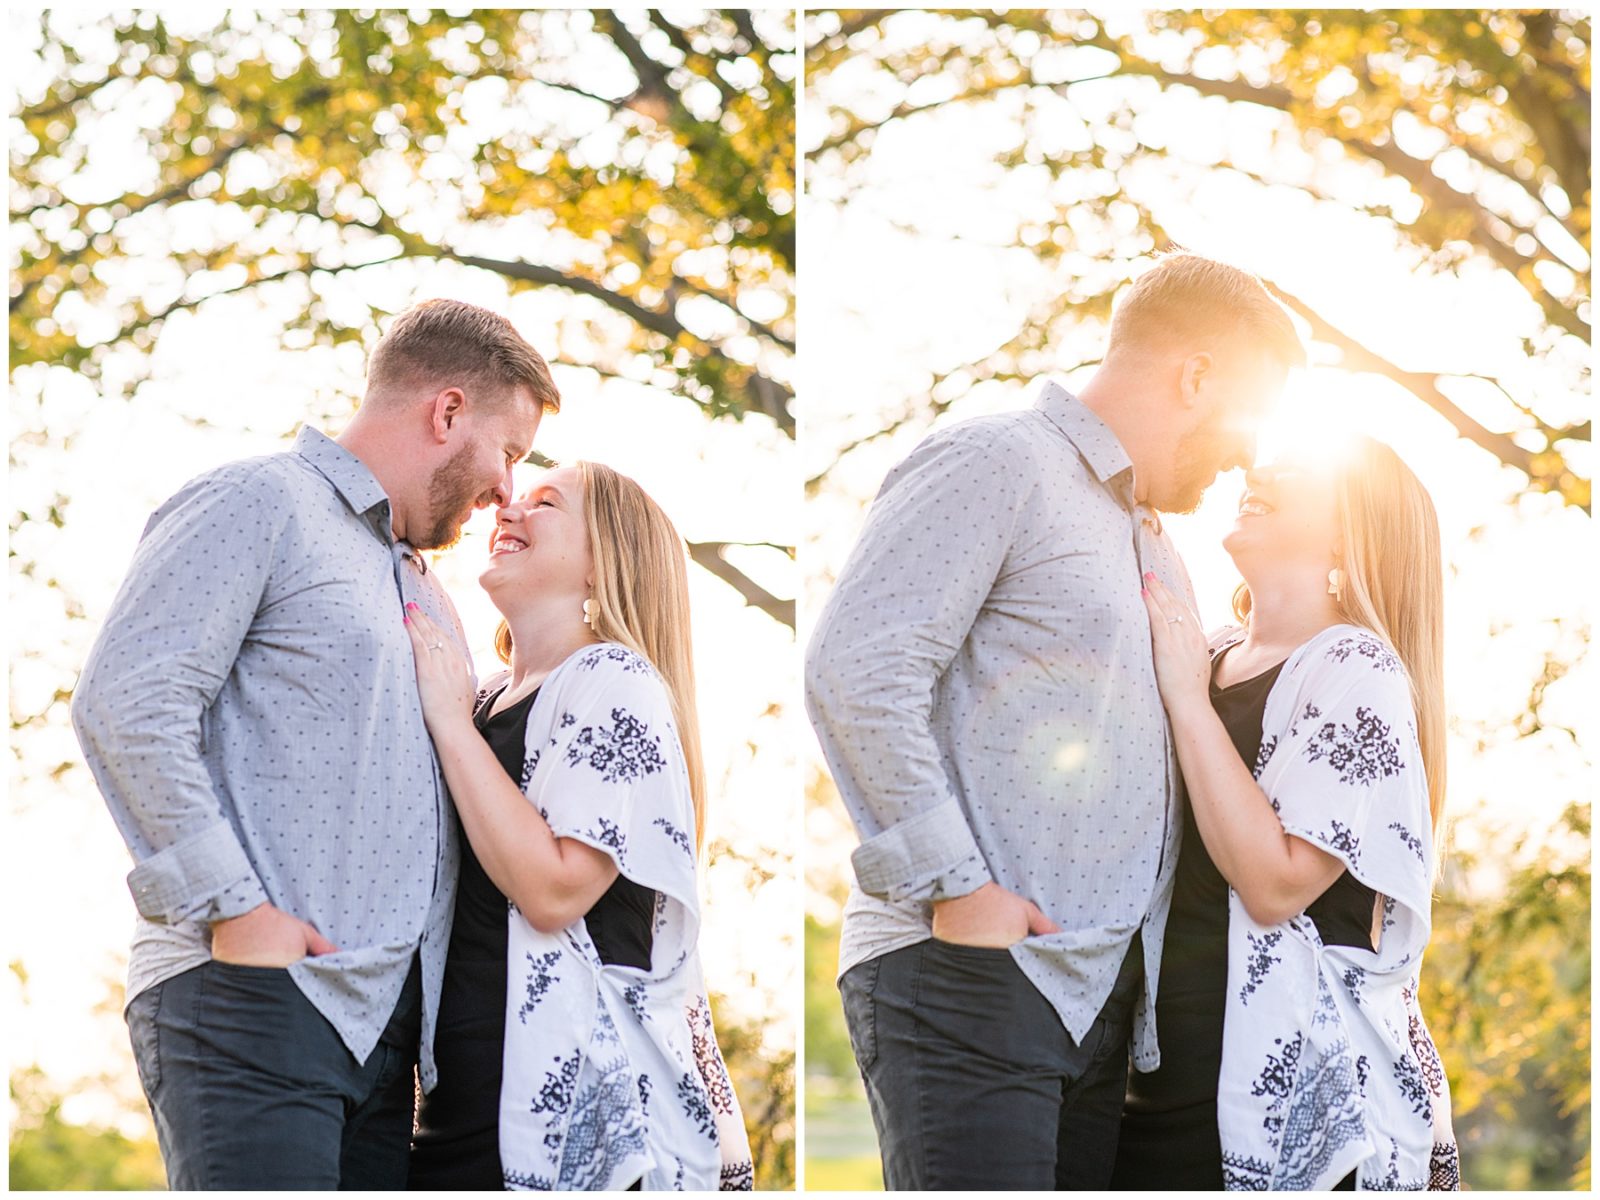 A Cleveland engagement session, wade lagoon photos, summer photos, sweet and candid photos, romantic engagement photos, outfit ideas, soft floral dress